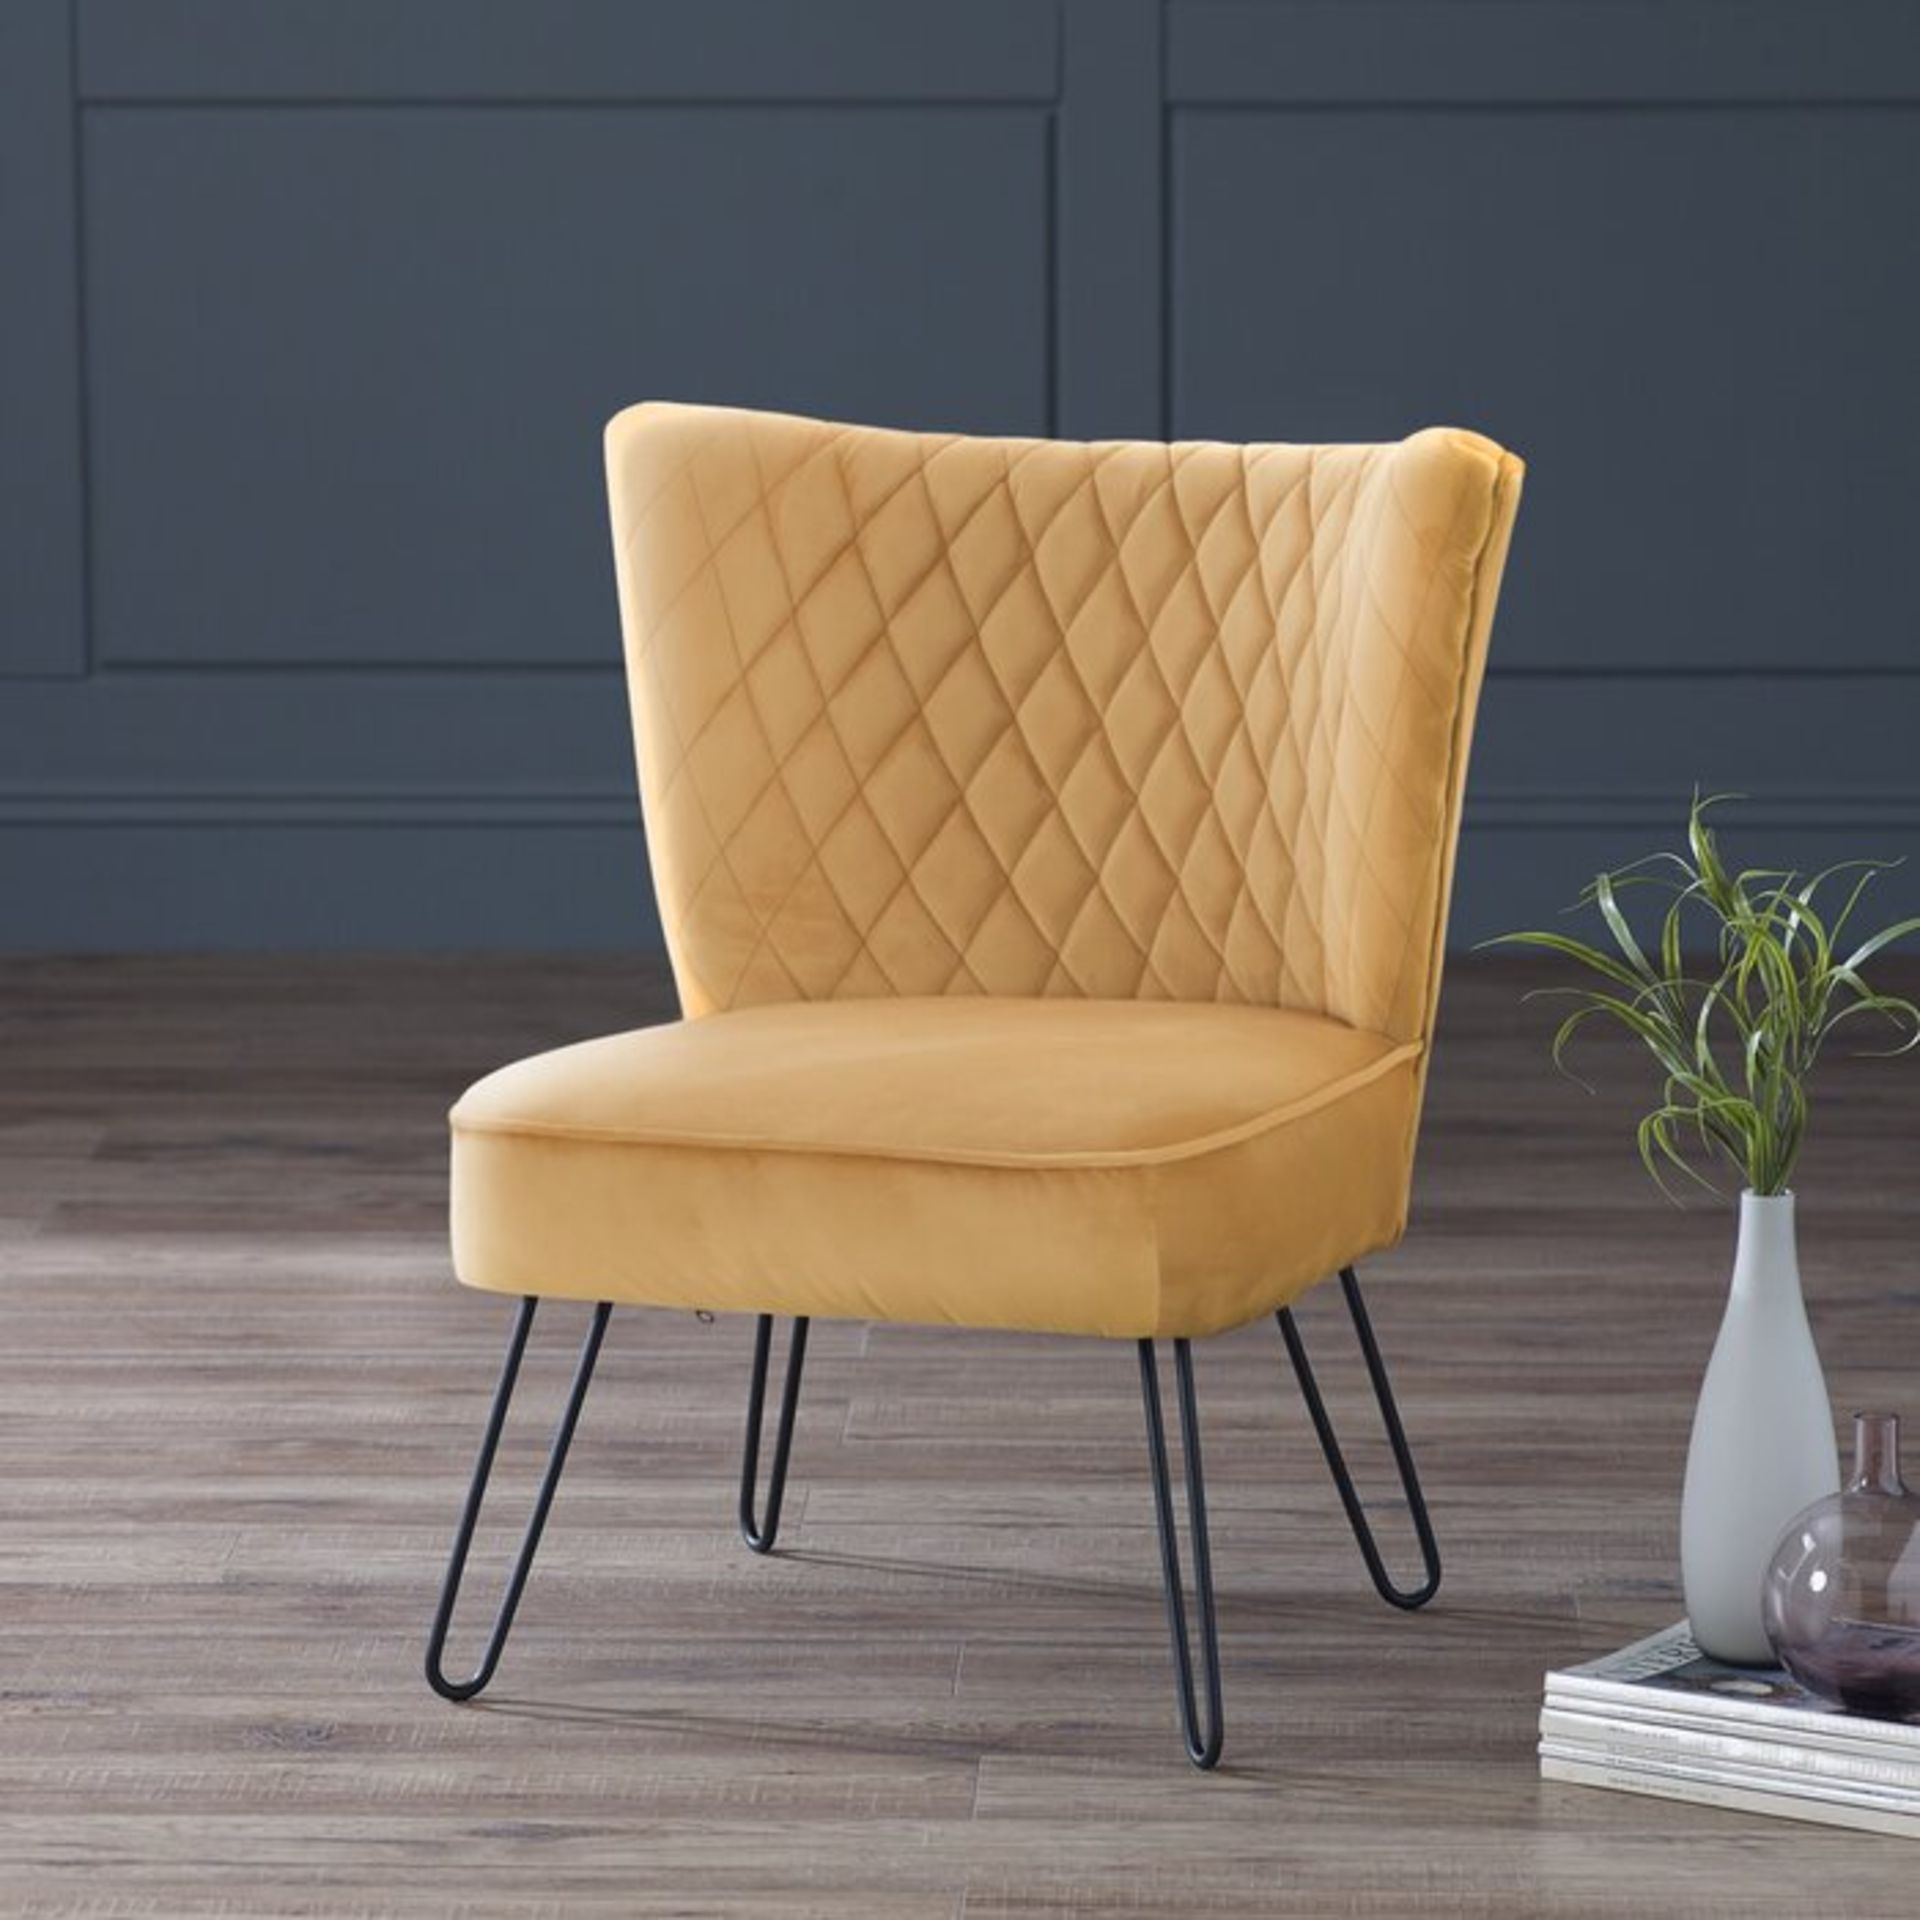 Cocktail Chair - RRP £180.00 - Image 2 of 2